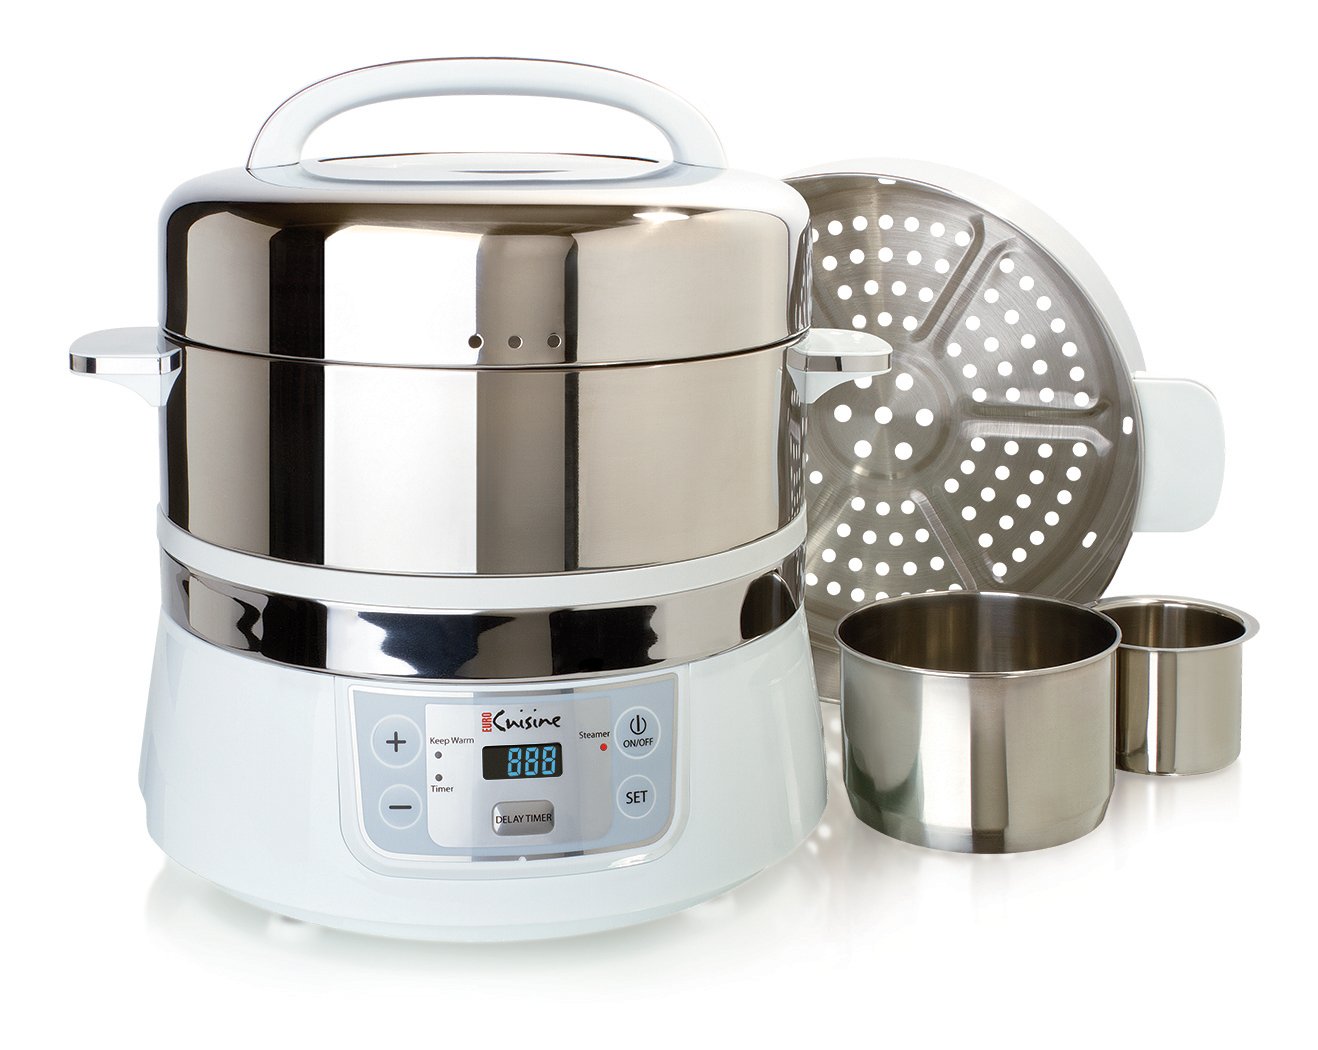 Euro Cuisine FS2500 Electric Food Steamer, White/Stainless Steel